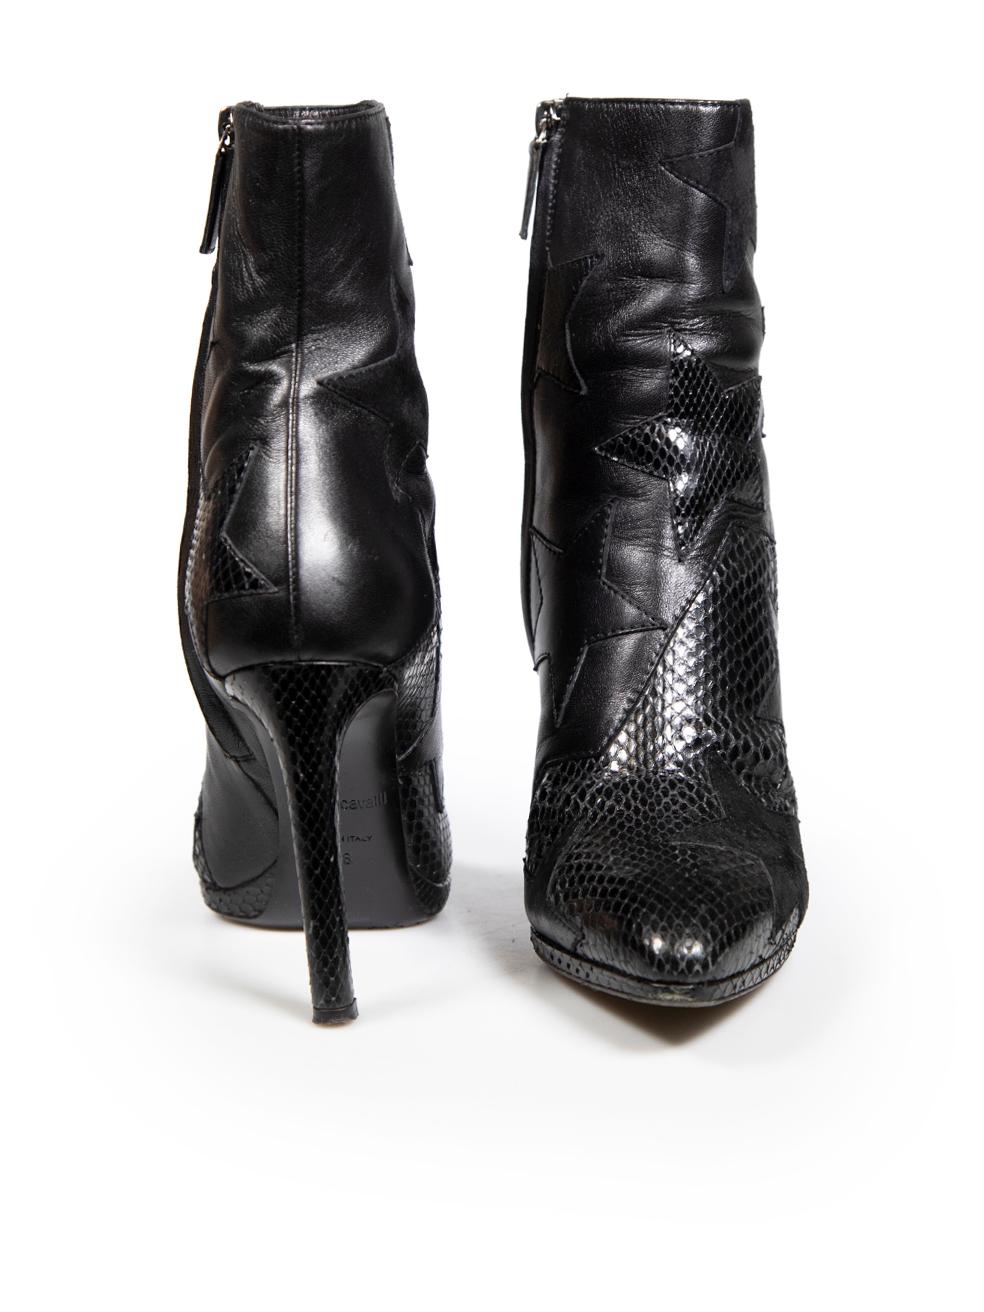 Roberto Cavalli Black Leather Star Heeled Boots Size IT 38 In Good Condition For Sale In London, GB